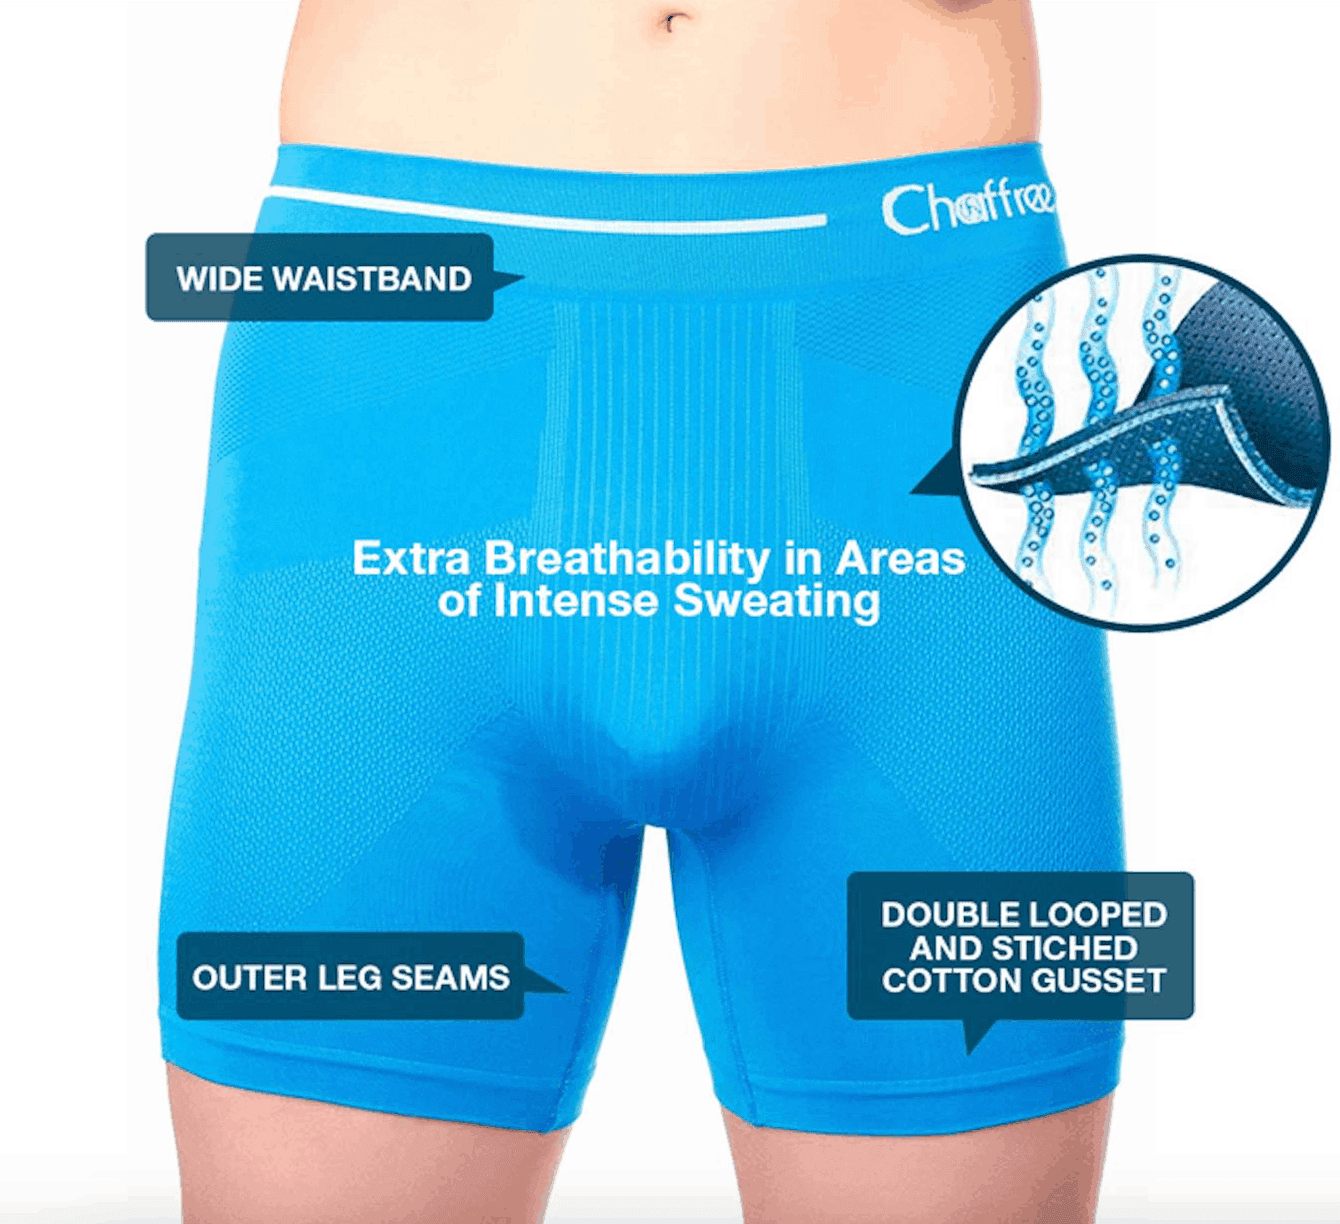 Anti Chafing Shorts. Get relief from sweating and chafing. » Chaffree